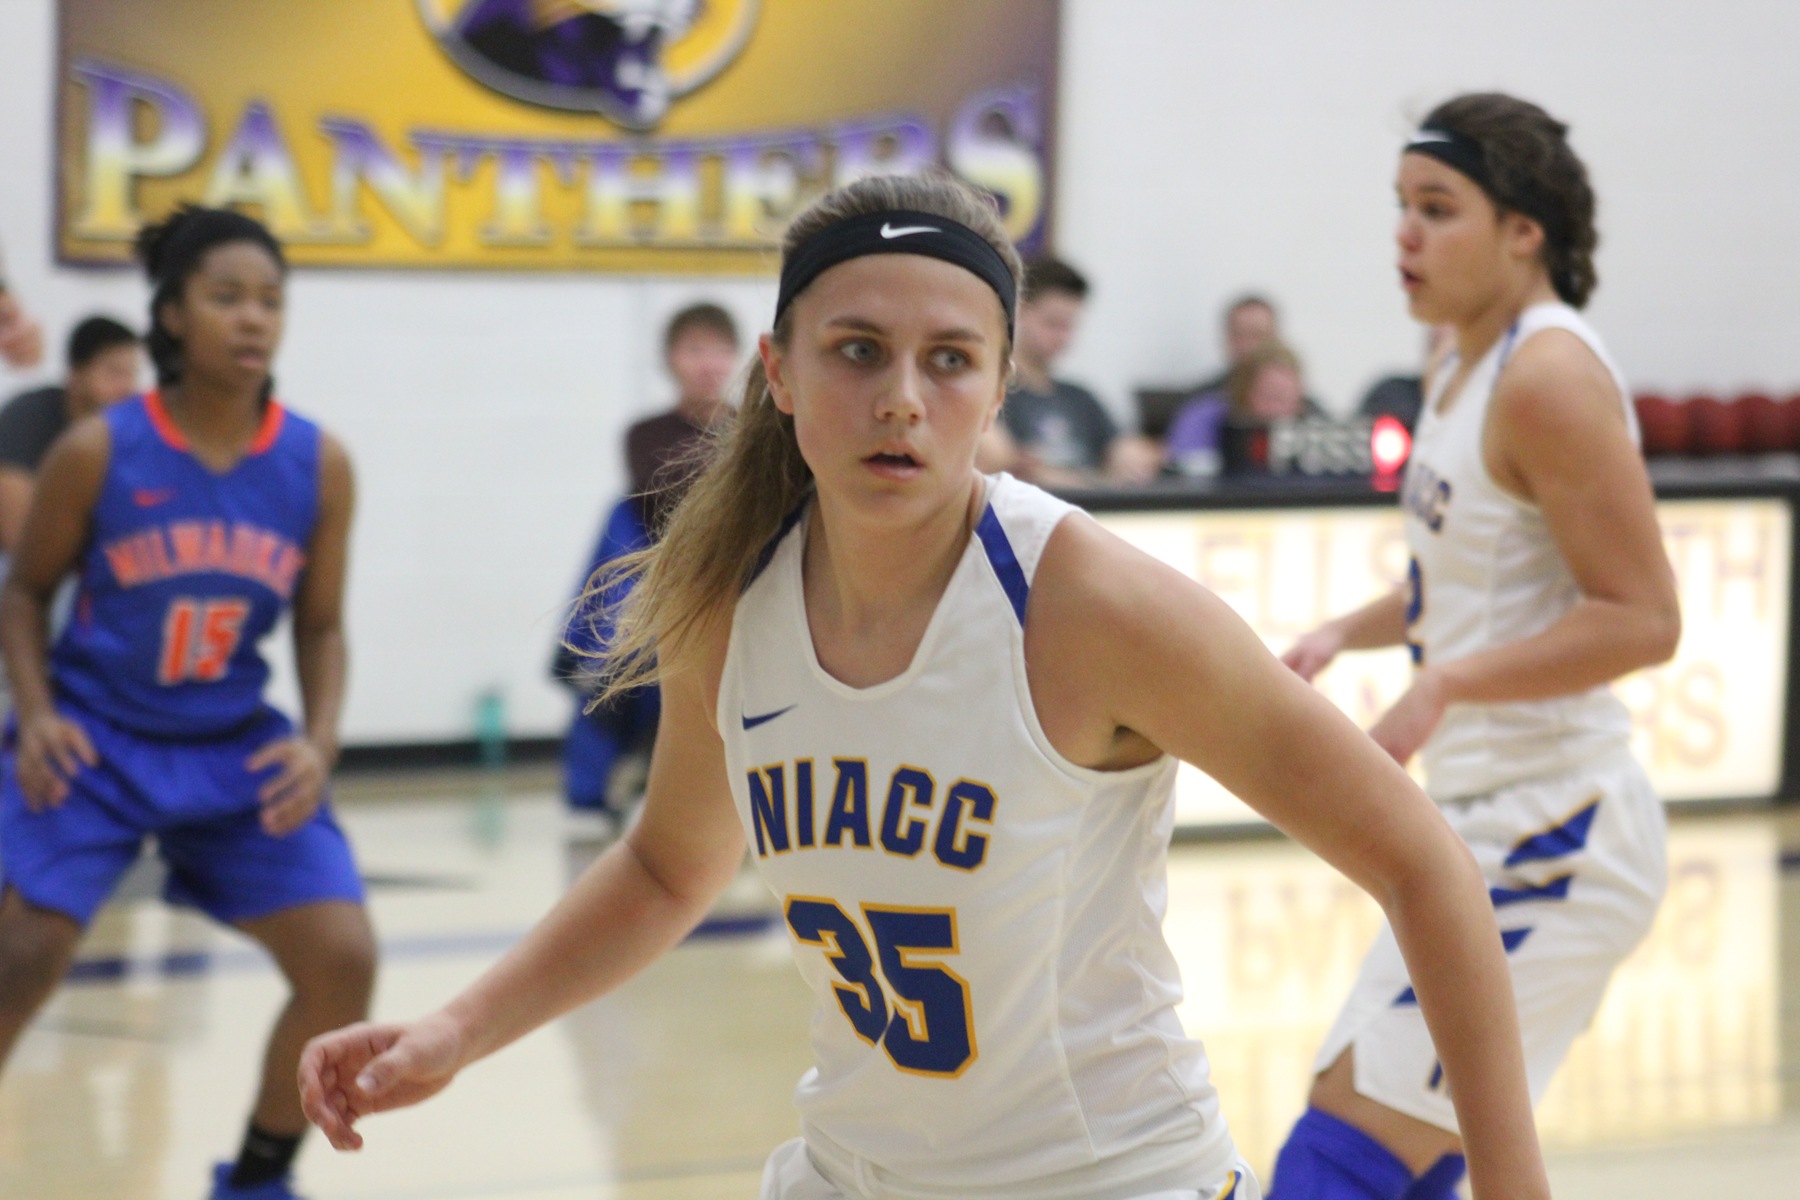 NIACC's Kelsie Willert plays defense in first half of Friday's game against Milwaukee Area Tech.